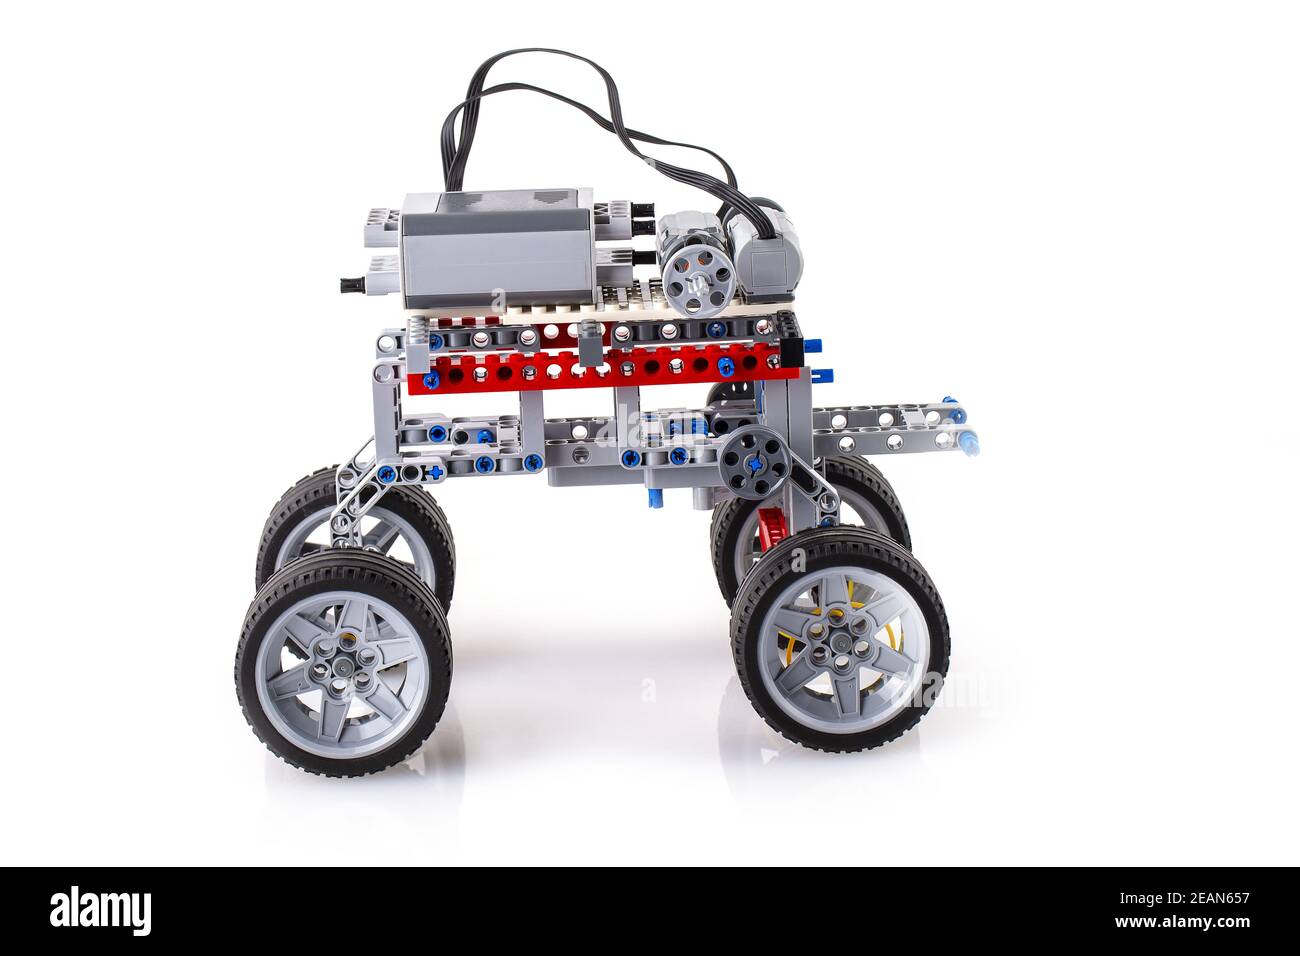 remote control robot made from building blocks assembled by children Stock Photo